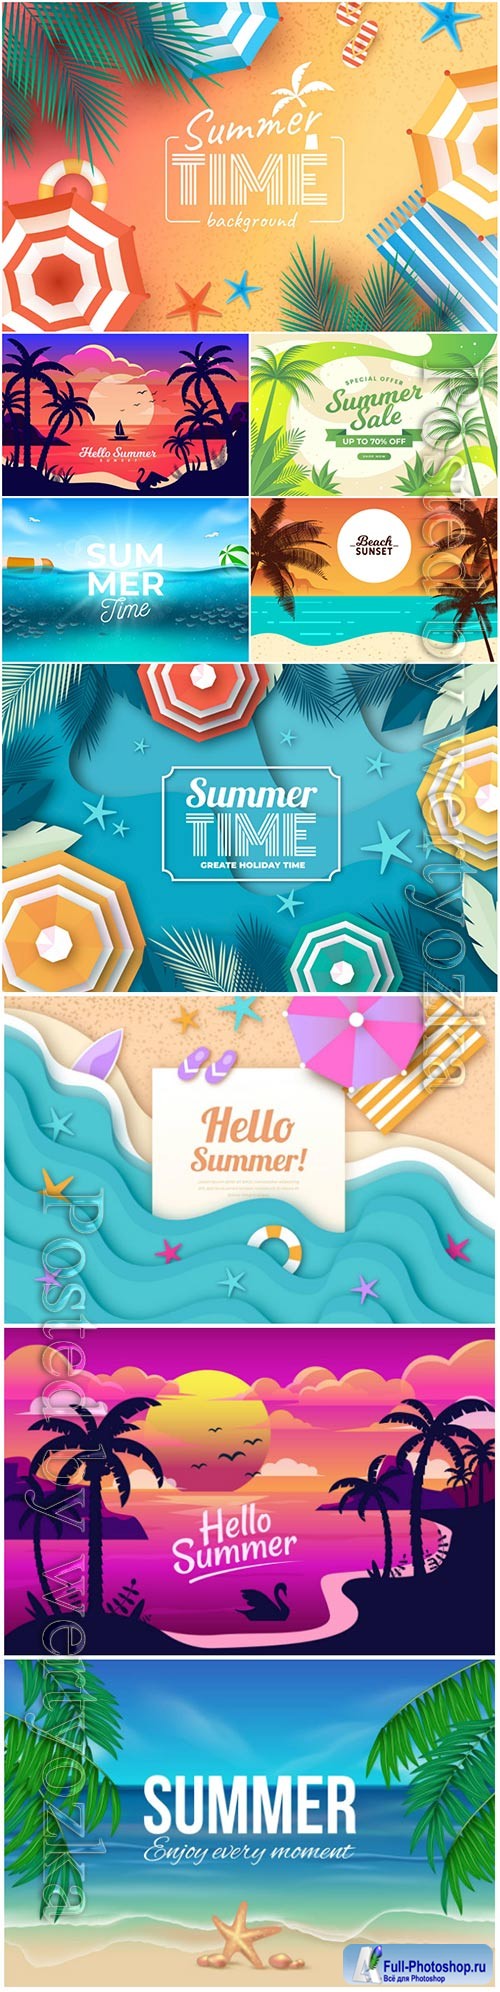 Summer realistic vector background with beach